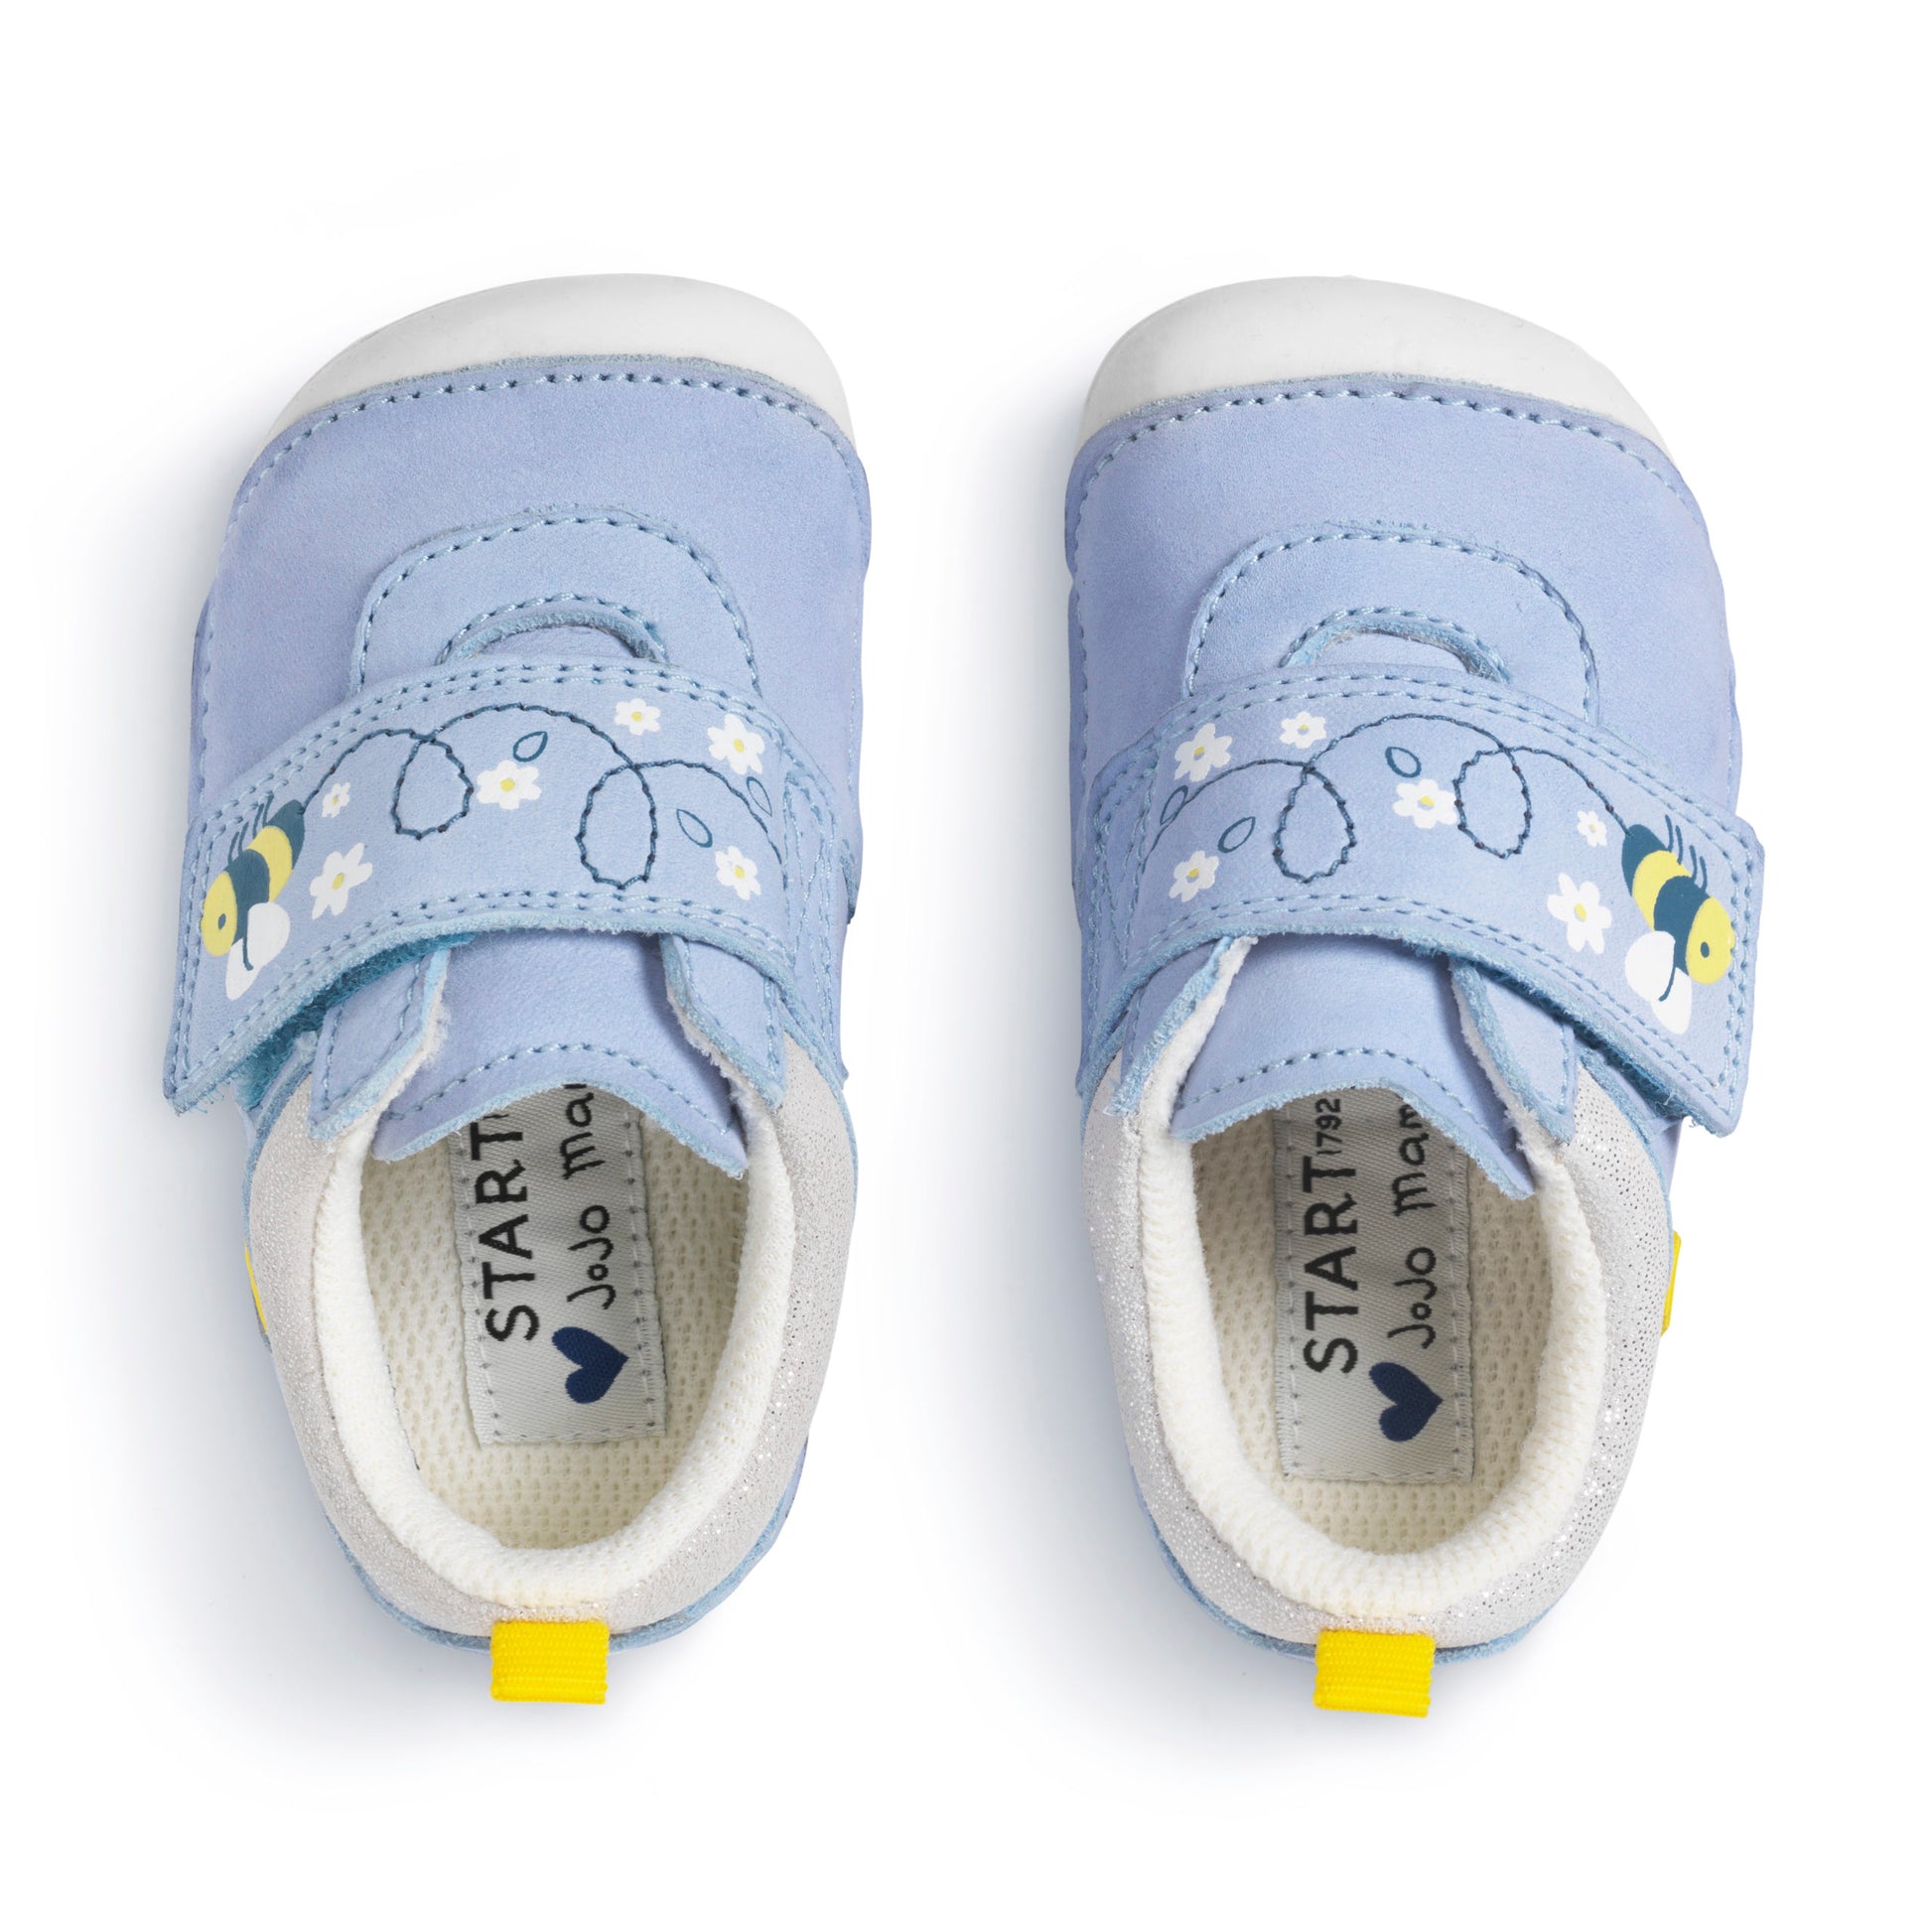 A girls pre walker by Start Rite, style Little Mate,in pale blue with bee motif and velcro fastening. Above view.